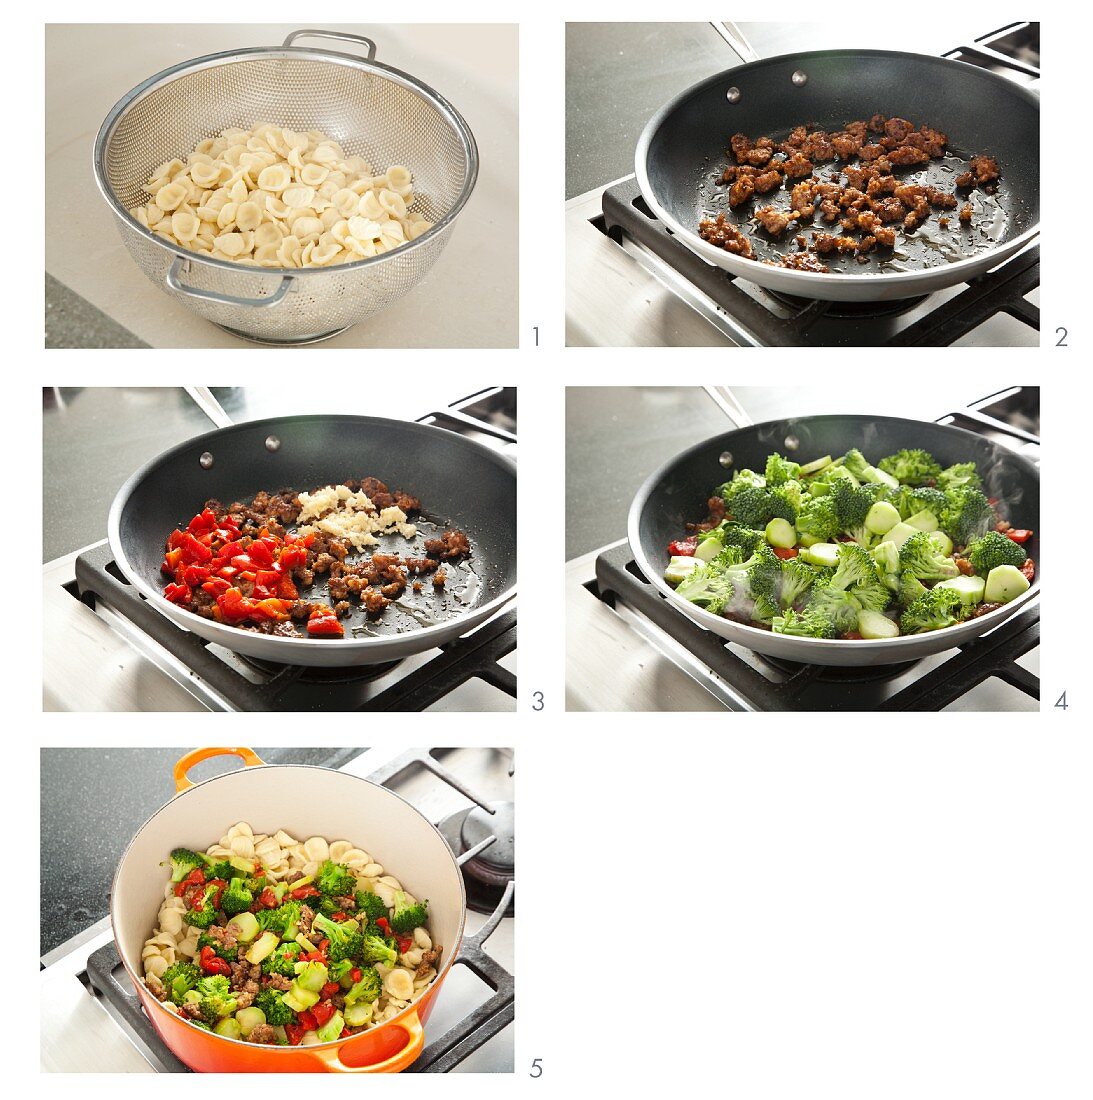 Steps for Making Pasta with Ground Sausage and Sauteed Vegetables